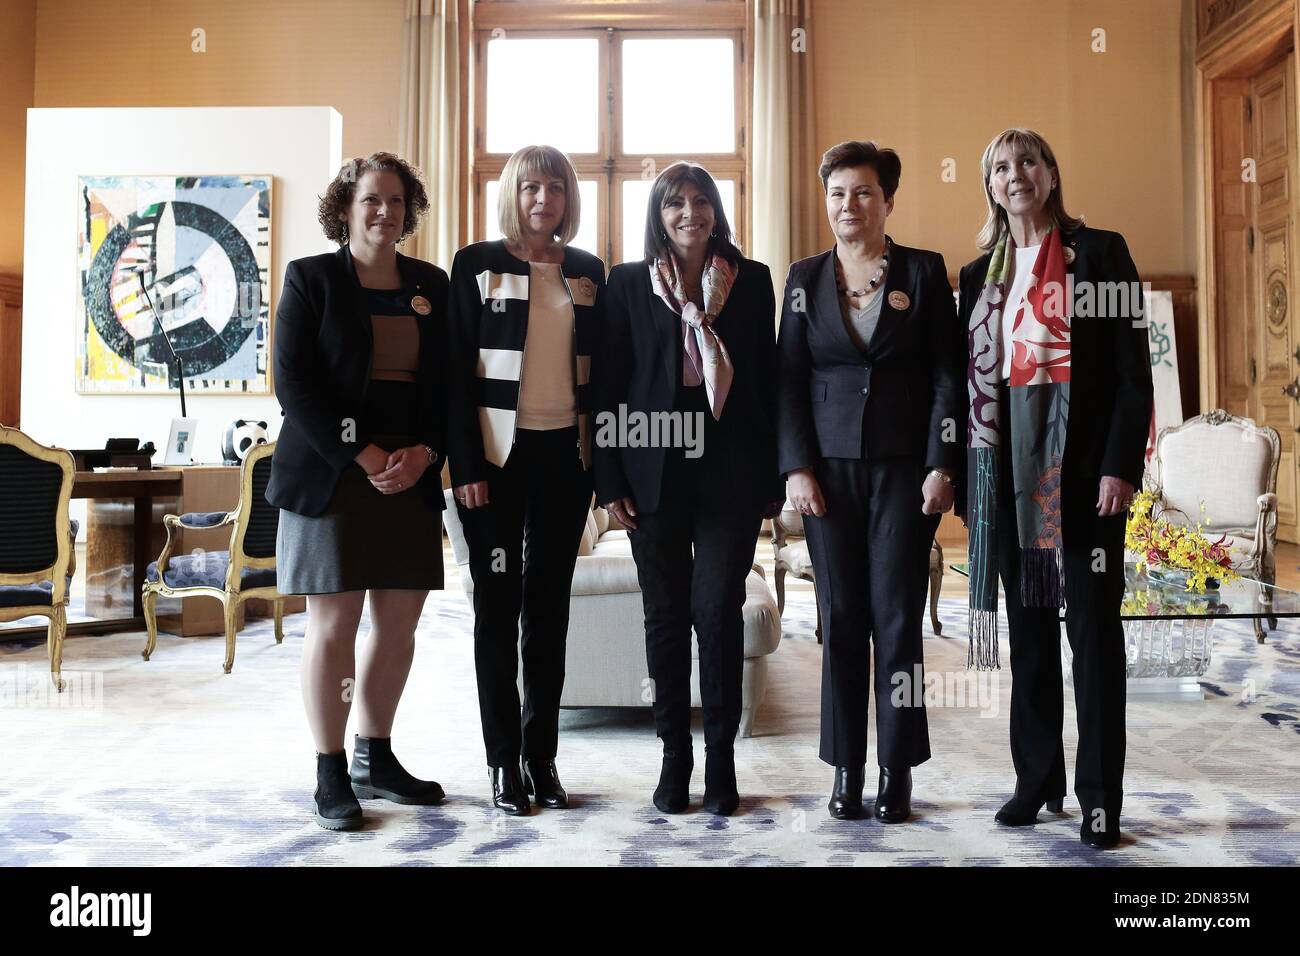 Paris mayor Anne Hidalgo (C) poses for a family photo in her Hotel de Ville offices with other European women mayors, (L-R) Karin Wanngard from Stockholm, Sweden, Jordanka Fandakova from Sofia, Bulgaria, Hanna Gronkiewicz from Warsaw, Poland and Lydie Polfer-Wurth from Luxembourg, at the end of the Summit of European Mayors for Climate, ahead of the United Nations Climate Change Conference, COP21 to be held at Le Bourget site near Paris from 30 November to 11 December 2015, in Paris, France on March 26, 2015. Photo by Stephane Lemouton/ABACAPRESS.COM Stock Photo